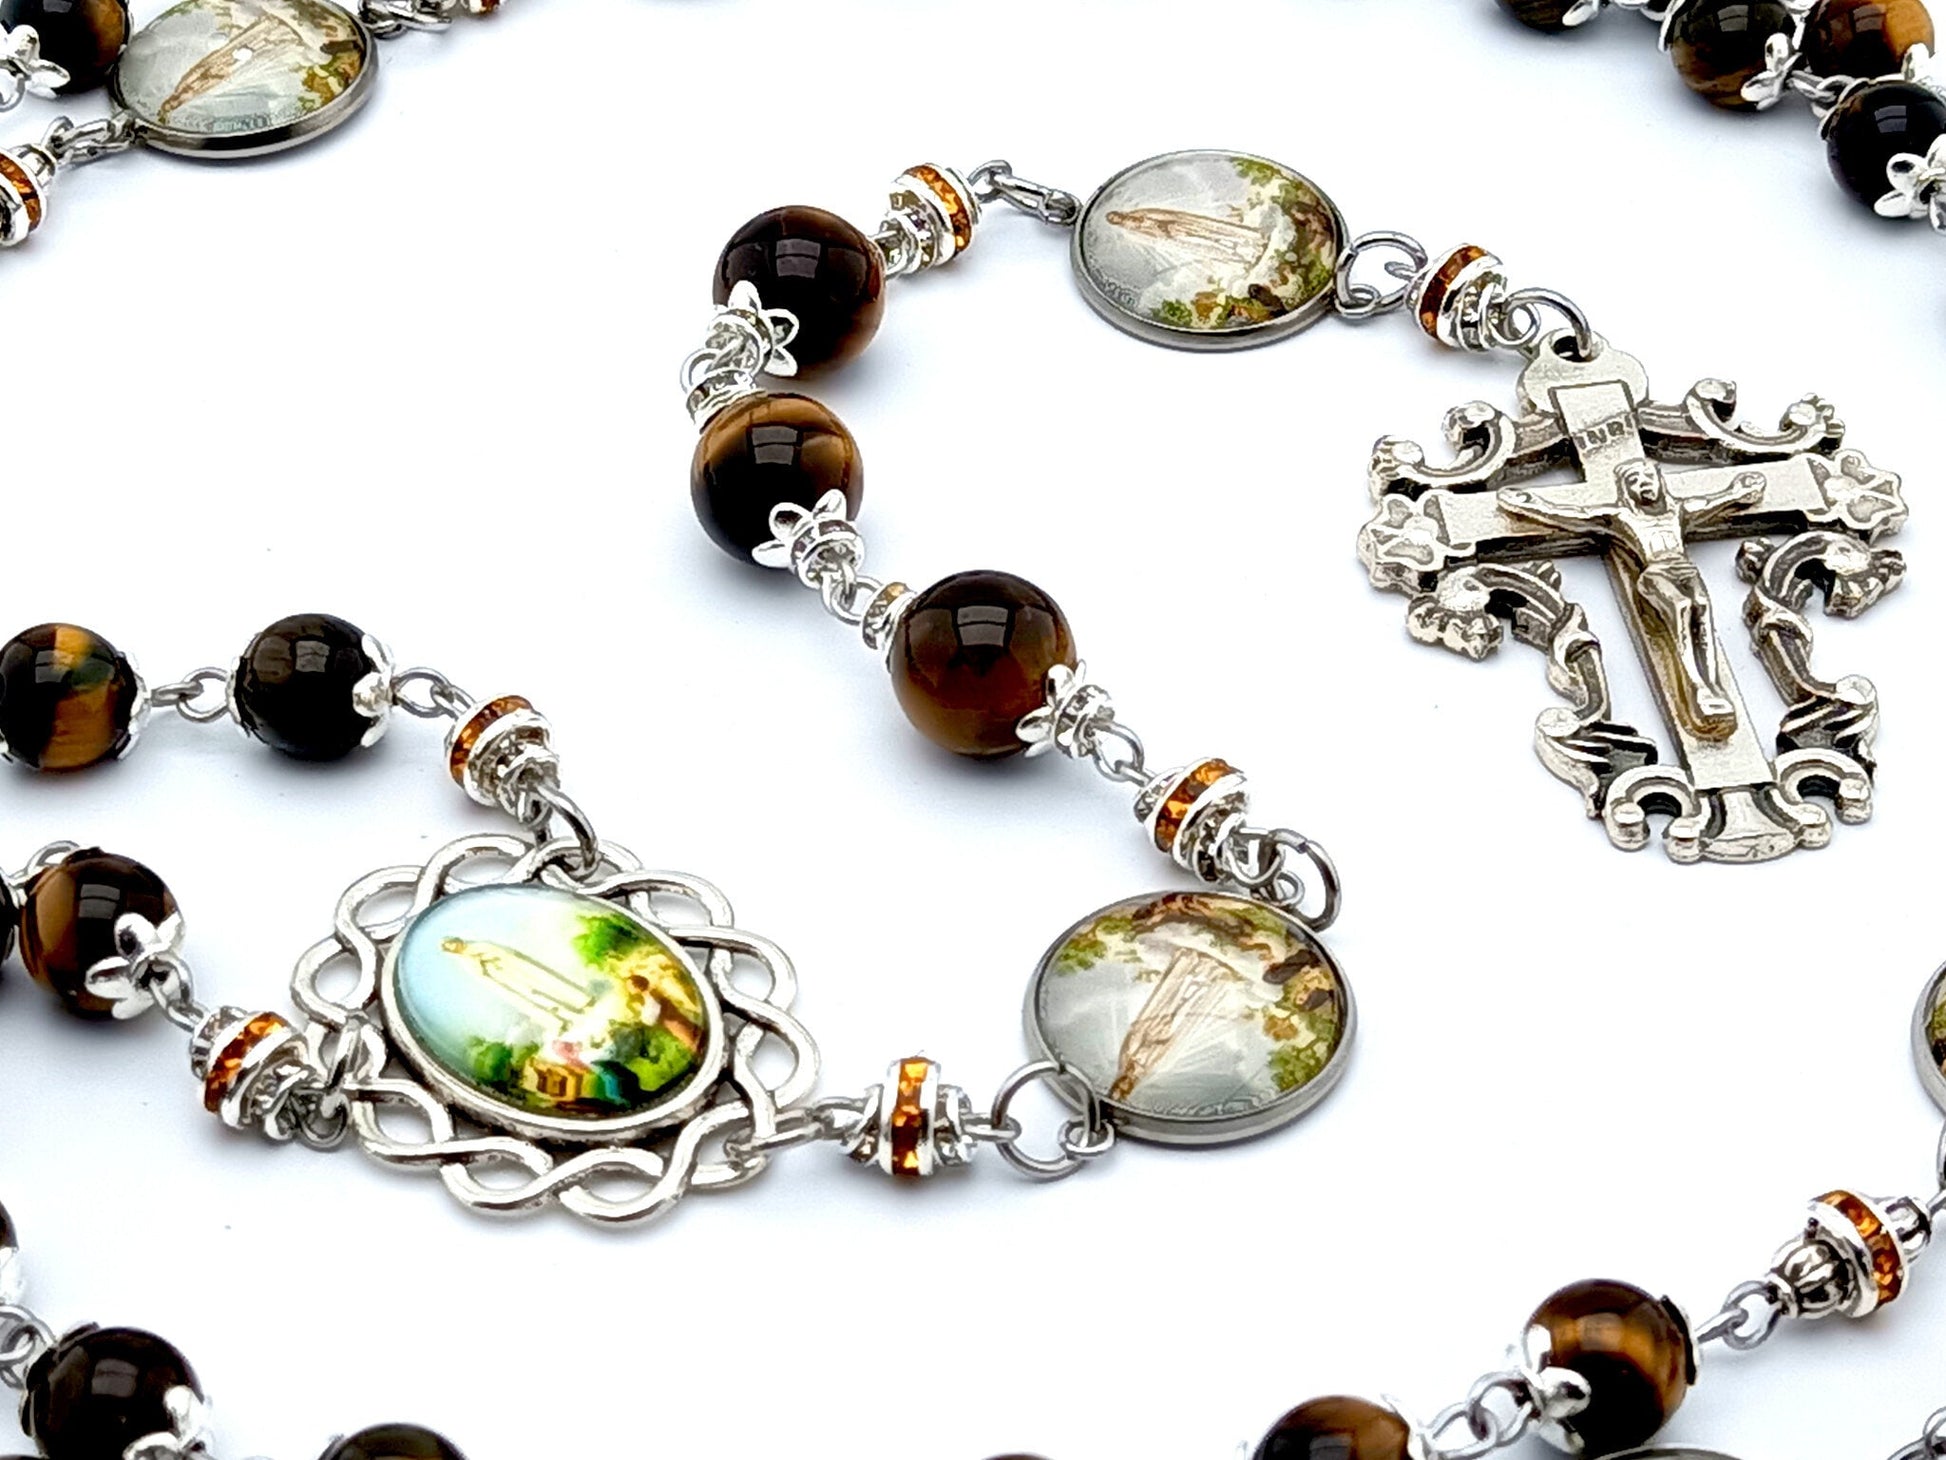 Our Lady of Fatima uniaue rosary beads with tigers eye gemstone and picture beads, filigree crucifix and picture centre medal.